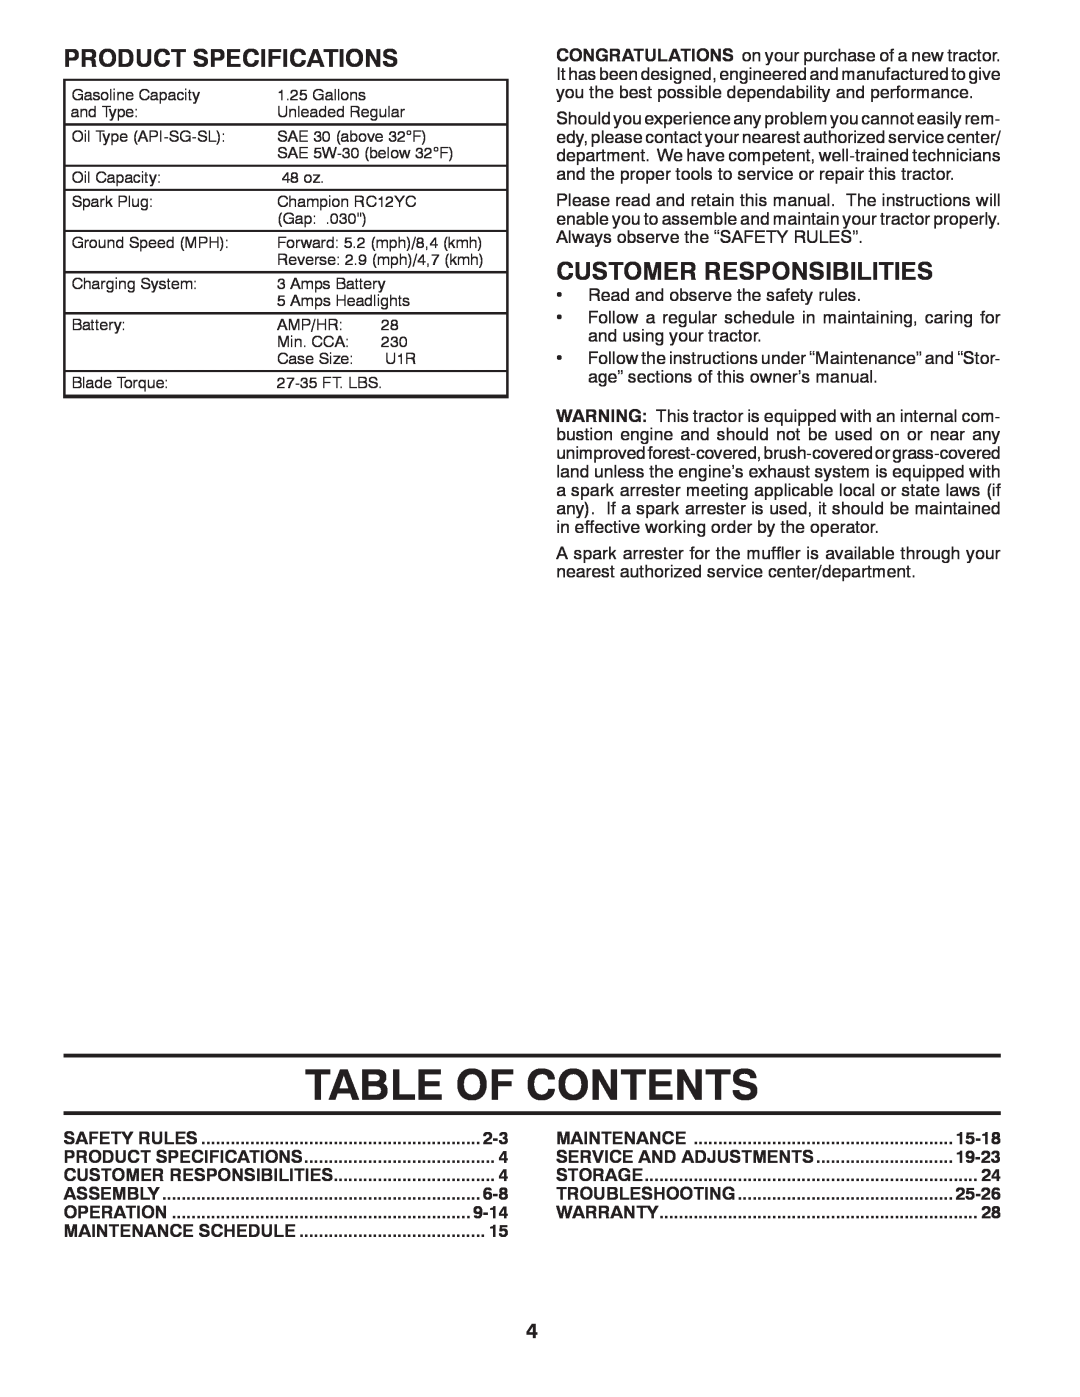 Murray 96017000700 manual Table Of Contents, Product Specifications, Customer Responsibilities, 9-14, 15-18, 19-23, 25-26 